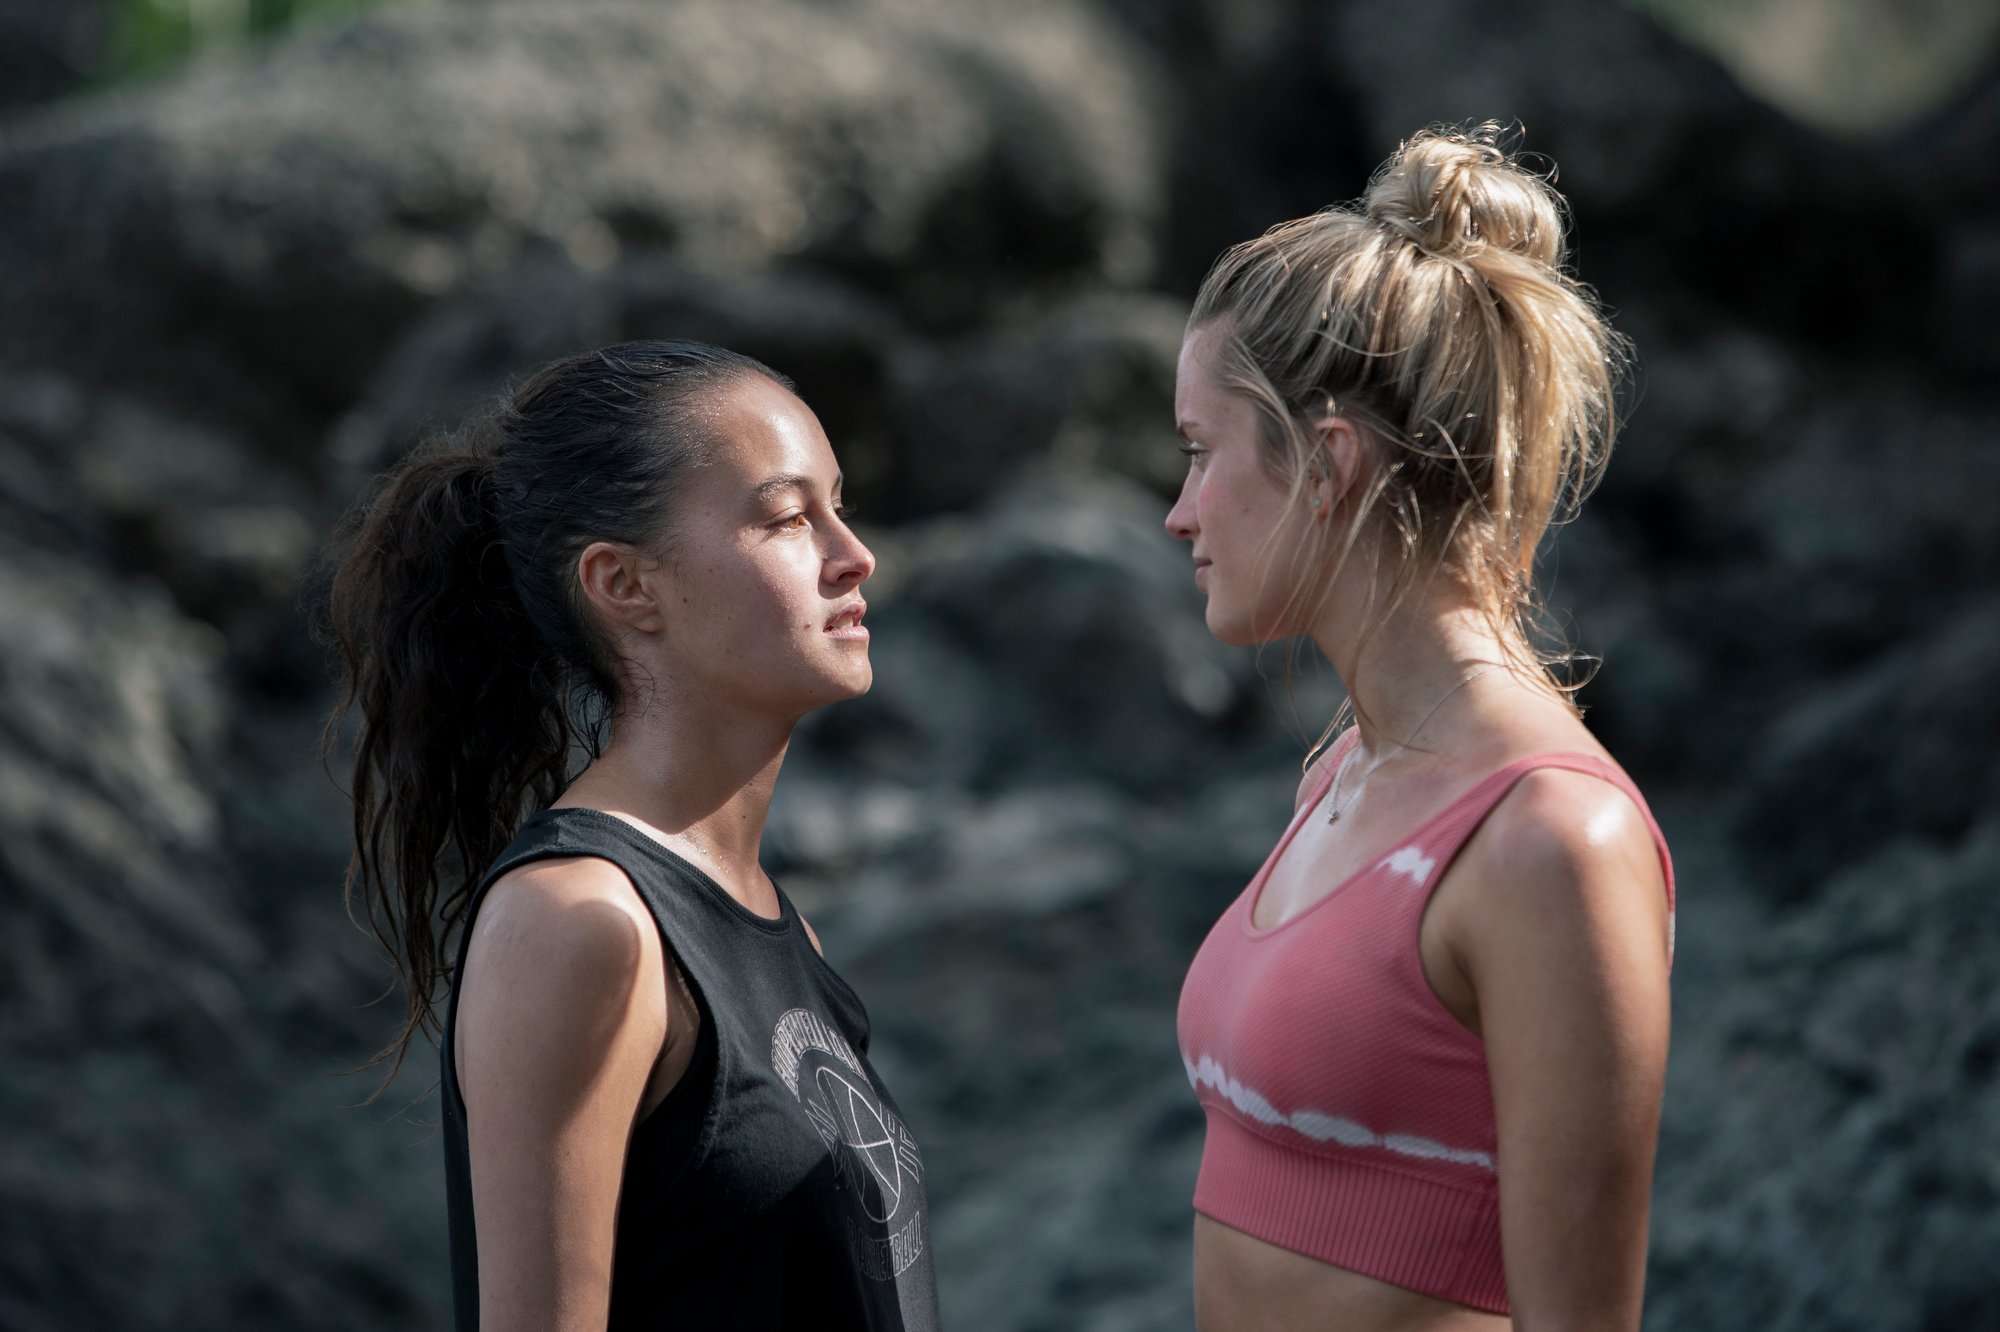 The Wilds stars Erana James and Mia Healey confront each other as Shelby and Toni